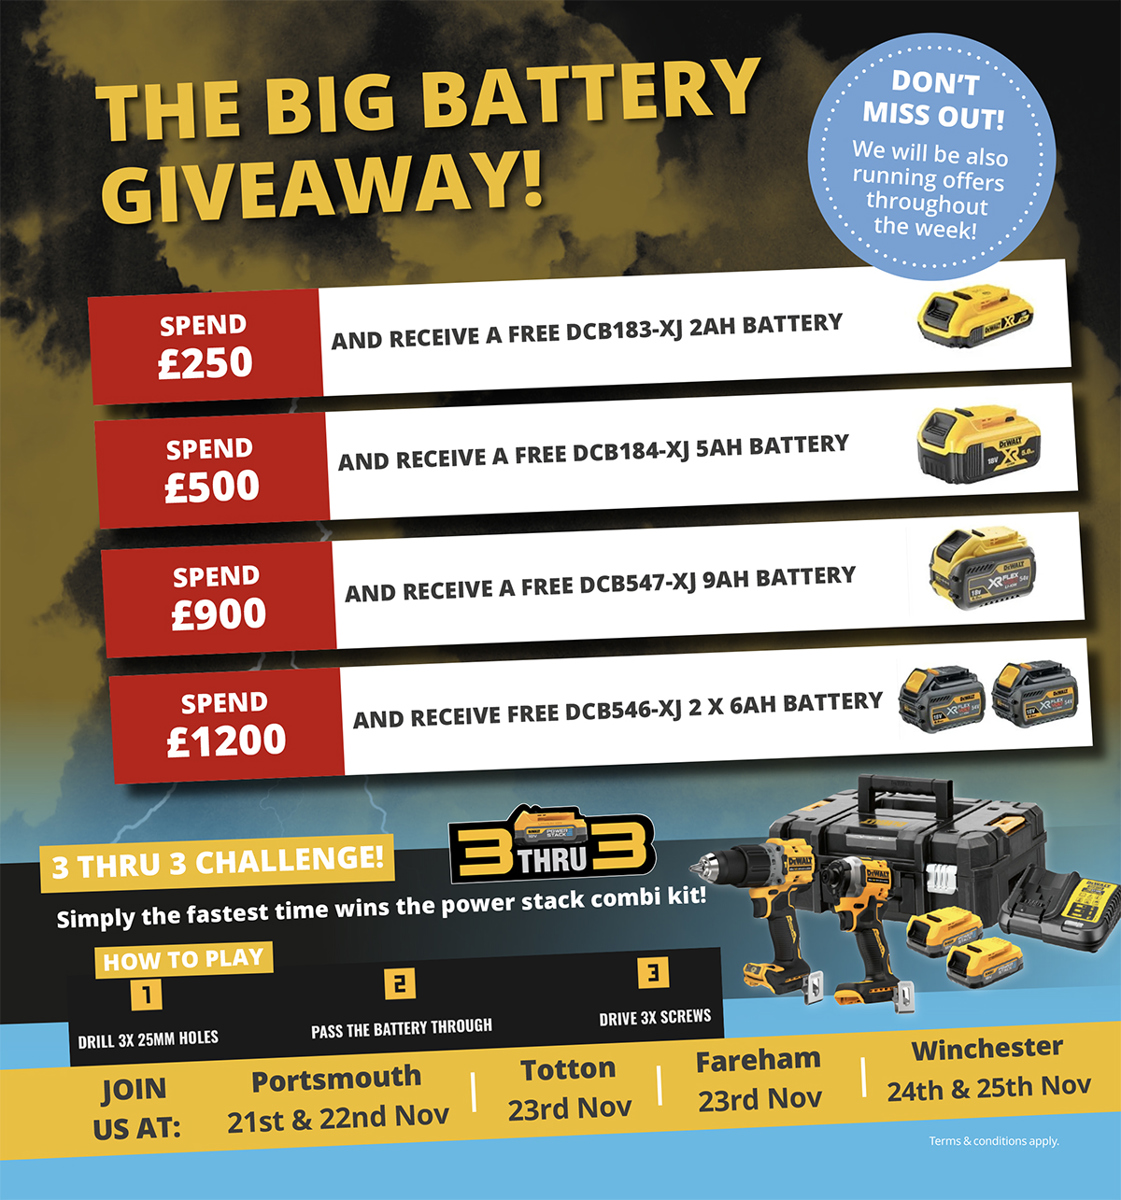 The Big Battery Giveaway